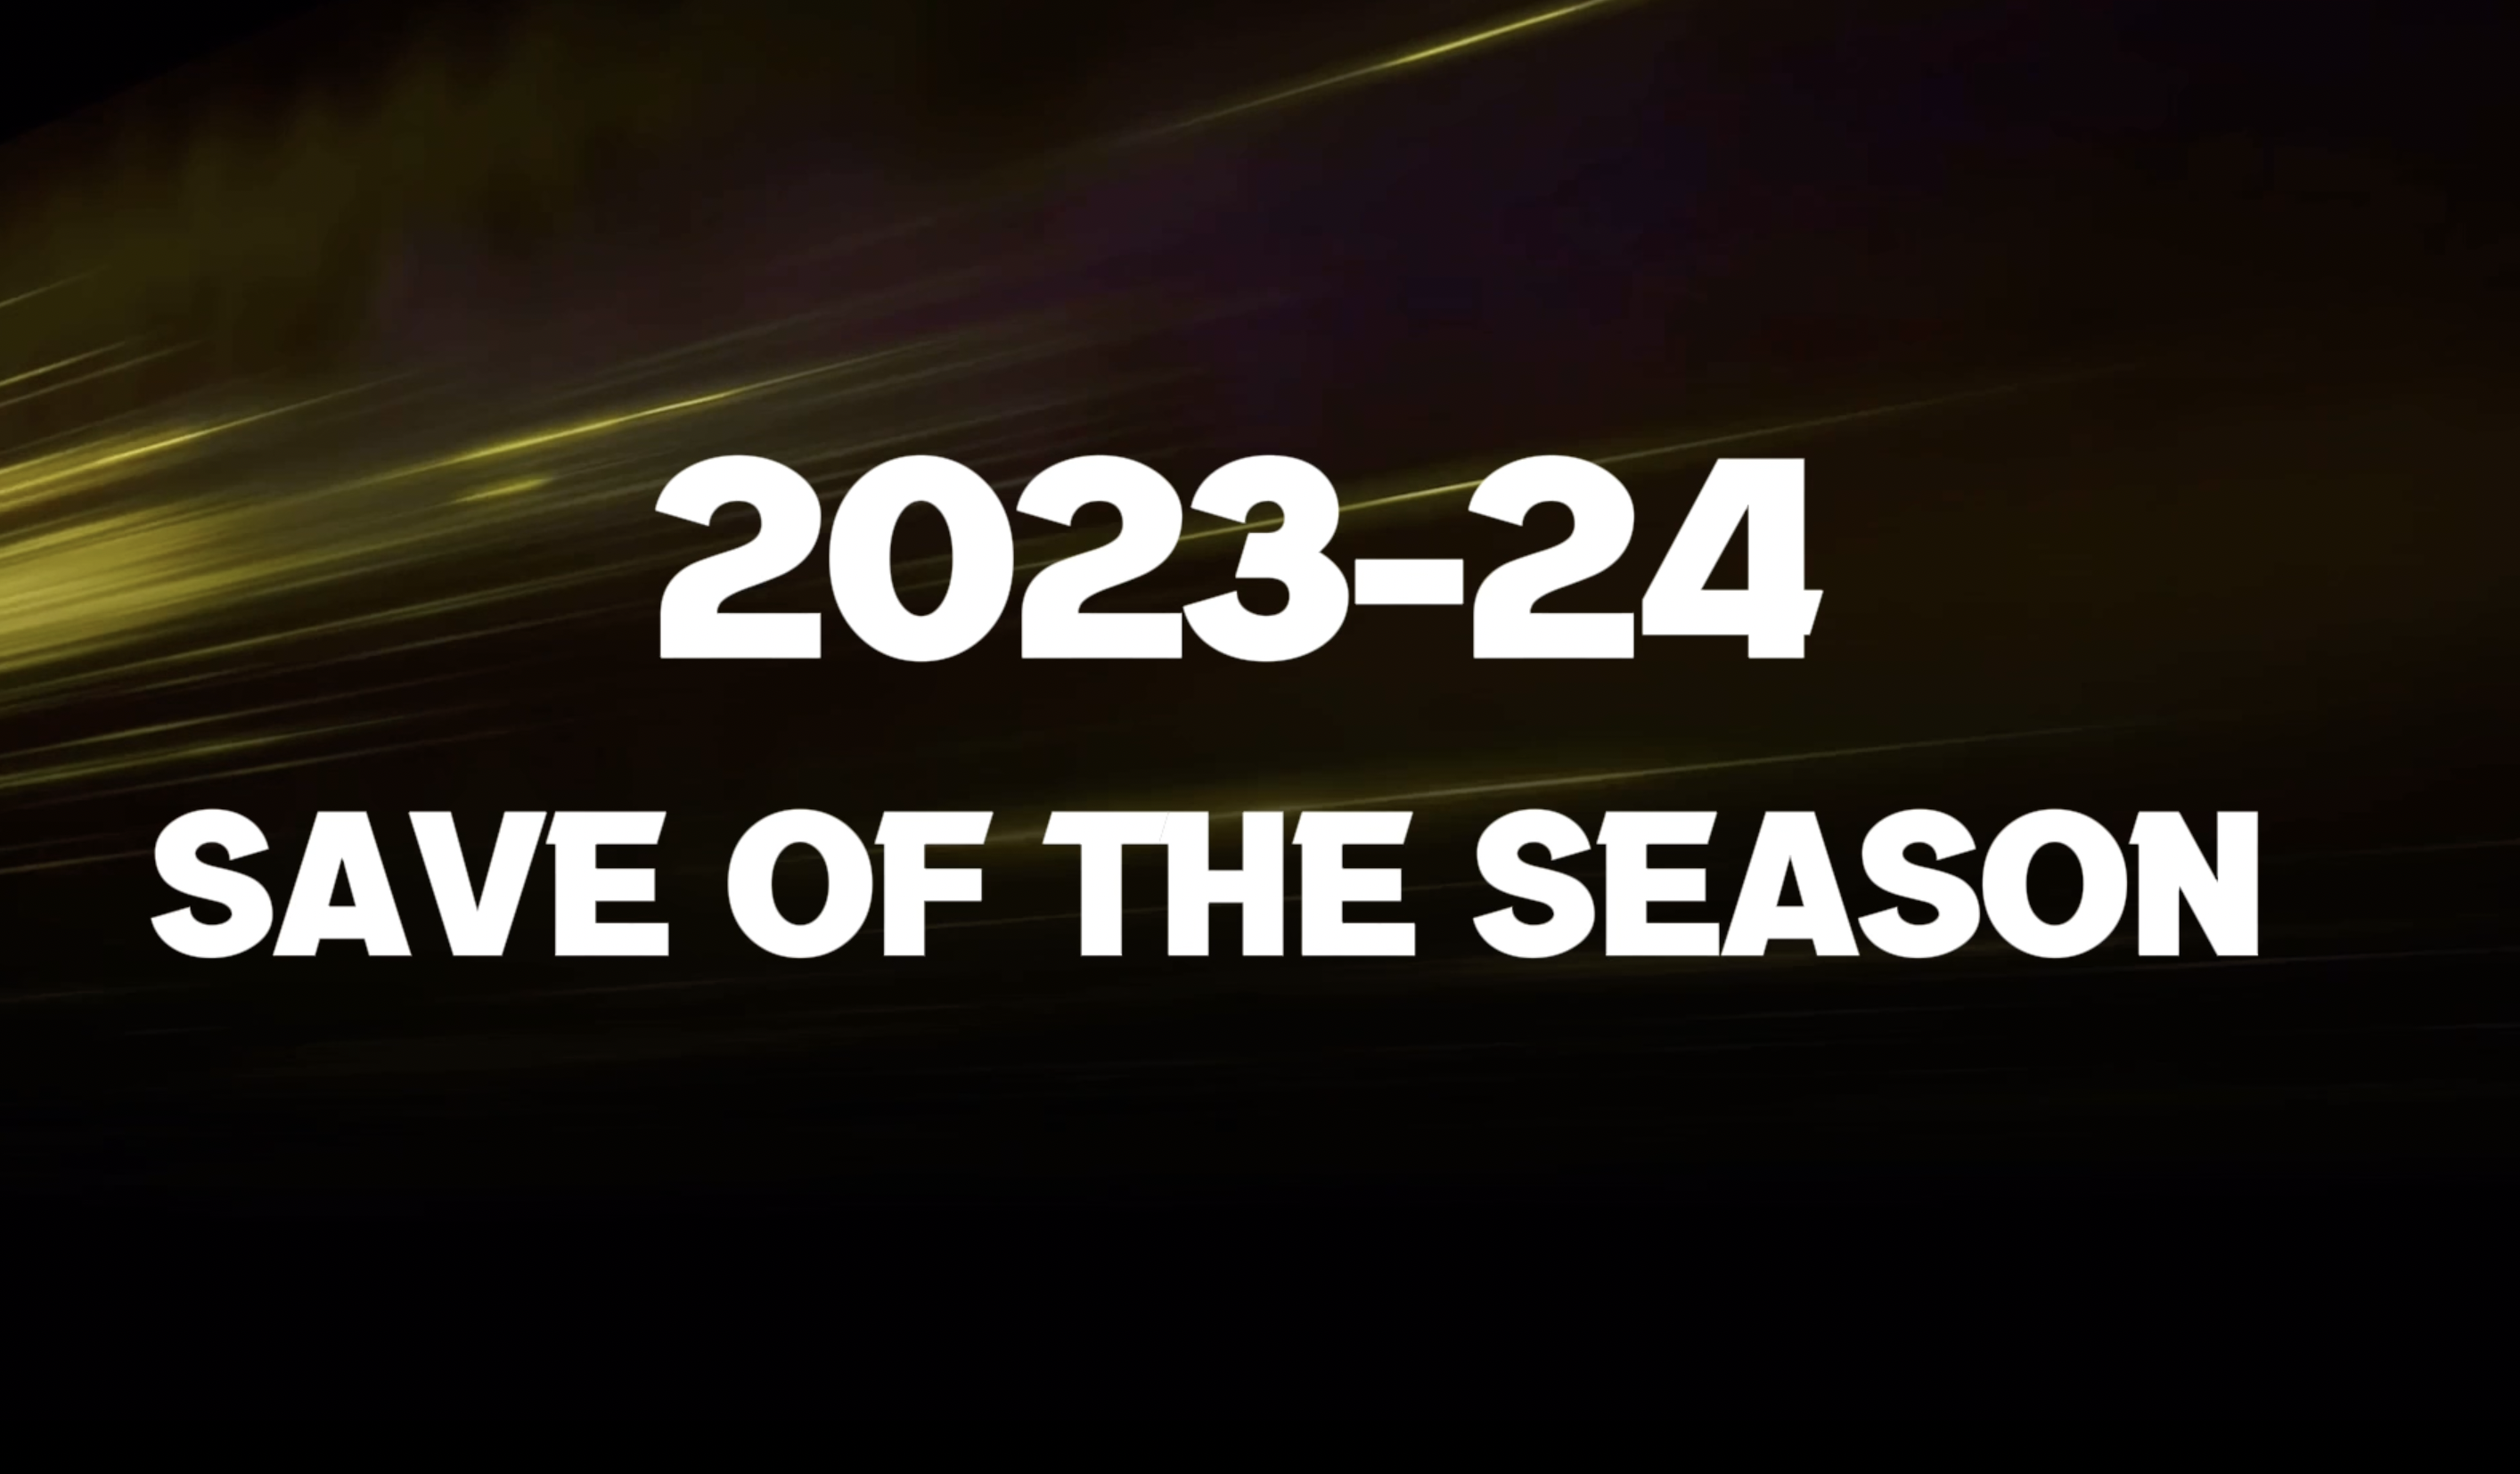 VOTE FOR YOUR 2023-24 SAVE OF THE SEASON Top Image